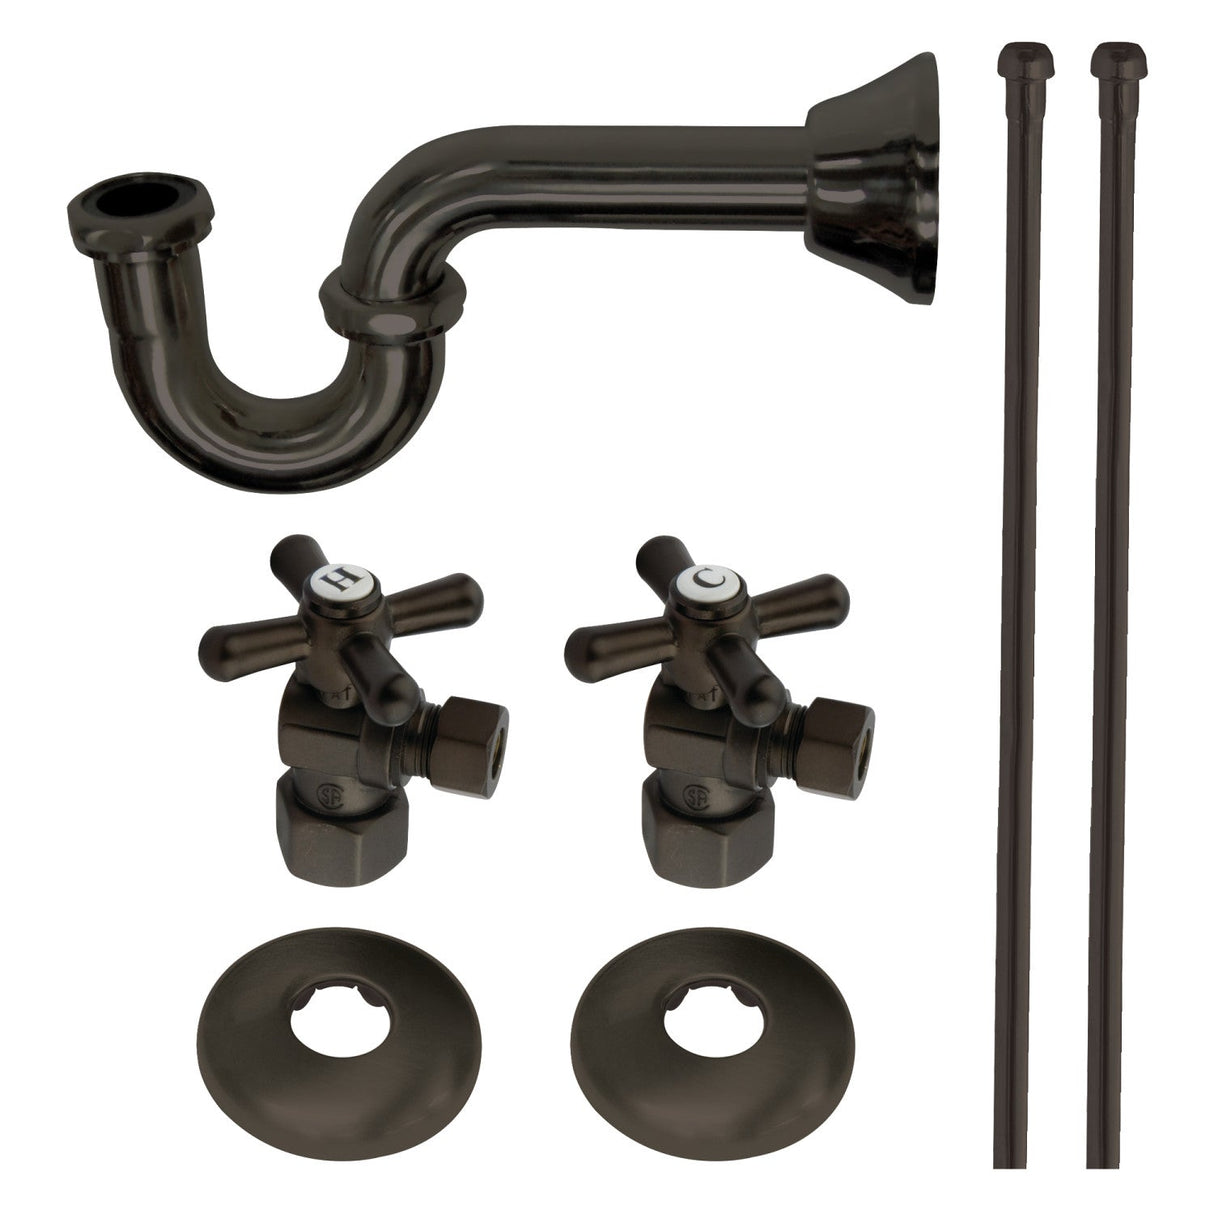 Trimscape KPK105P Traditional Plumbing Supply Kit Combo with P-Trap, Oil Rubbed Bronze